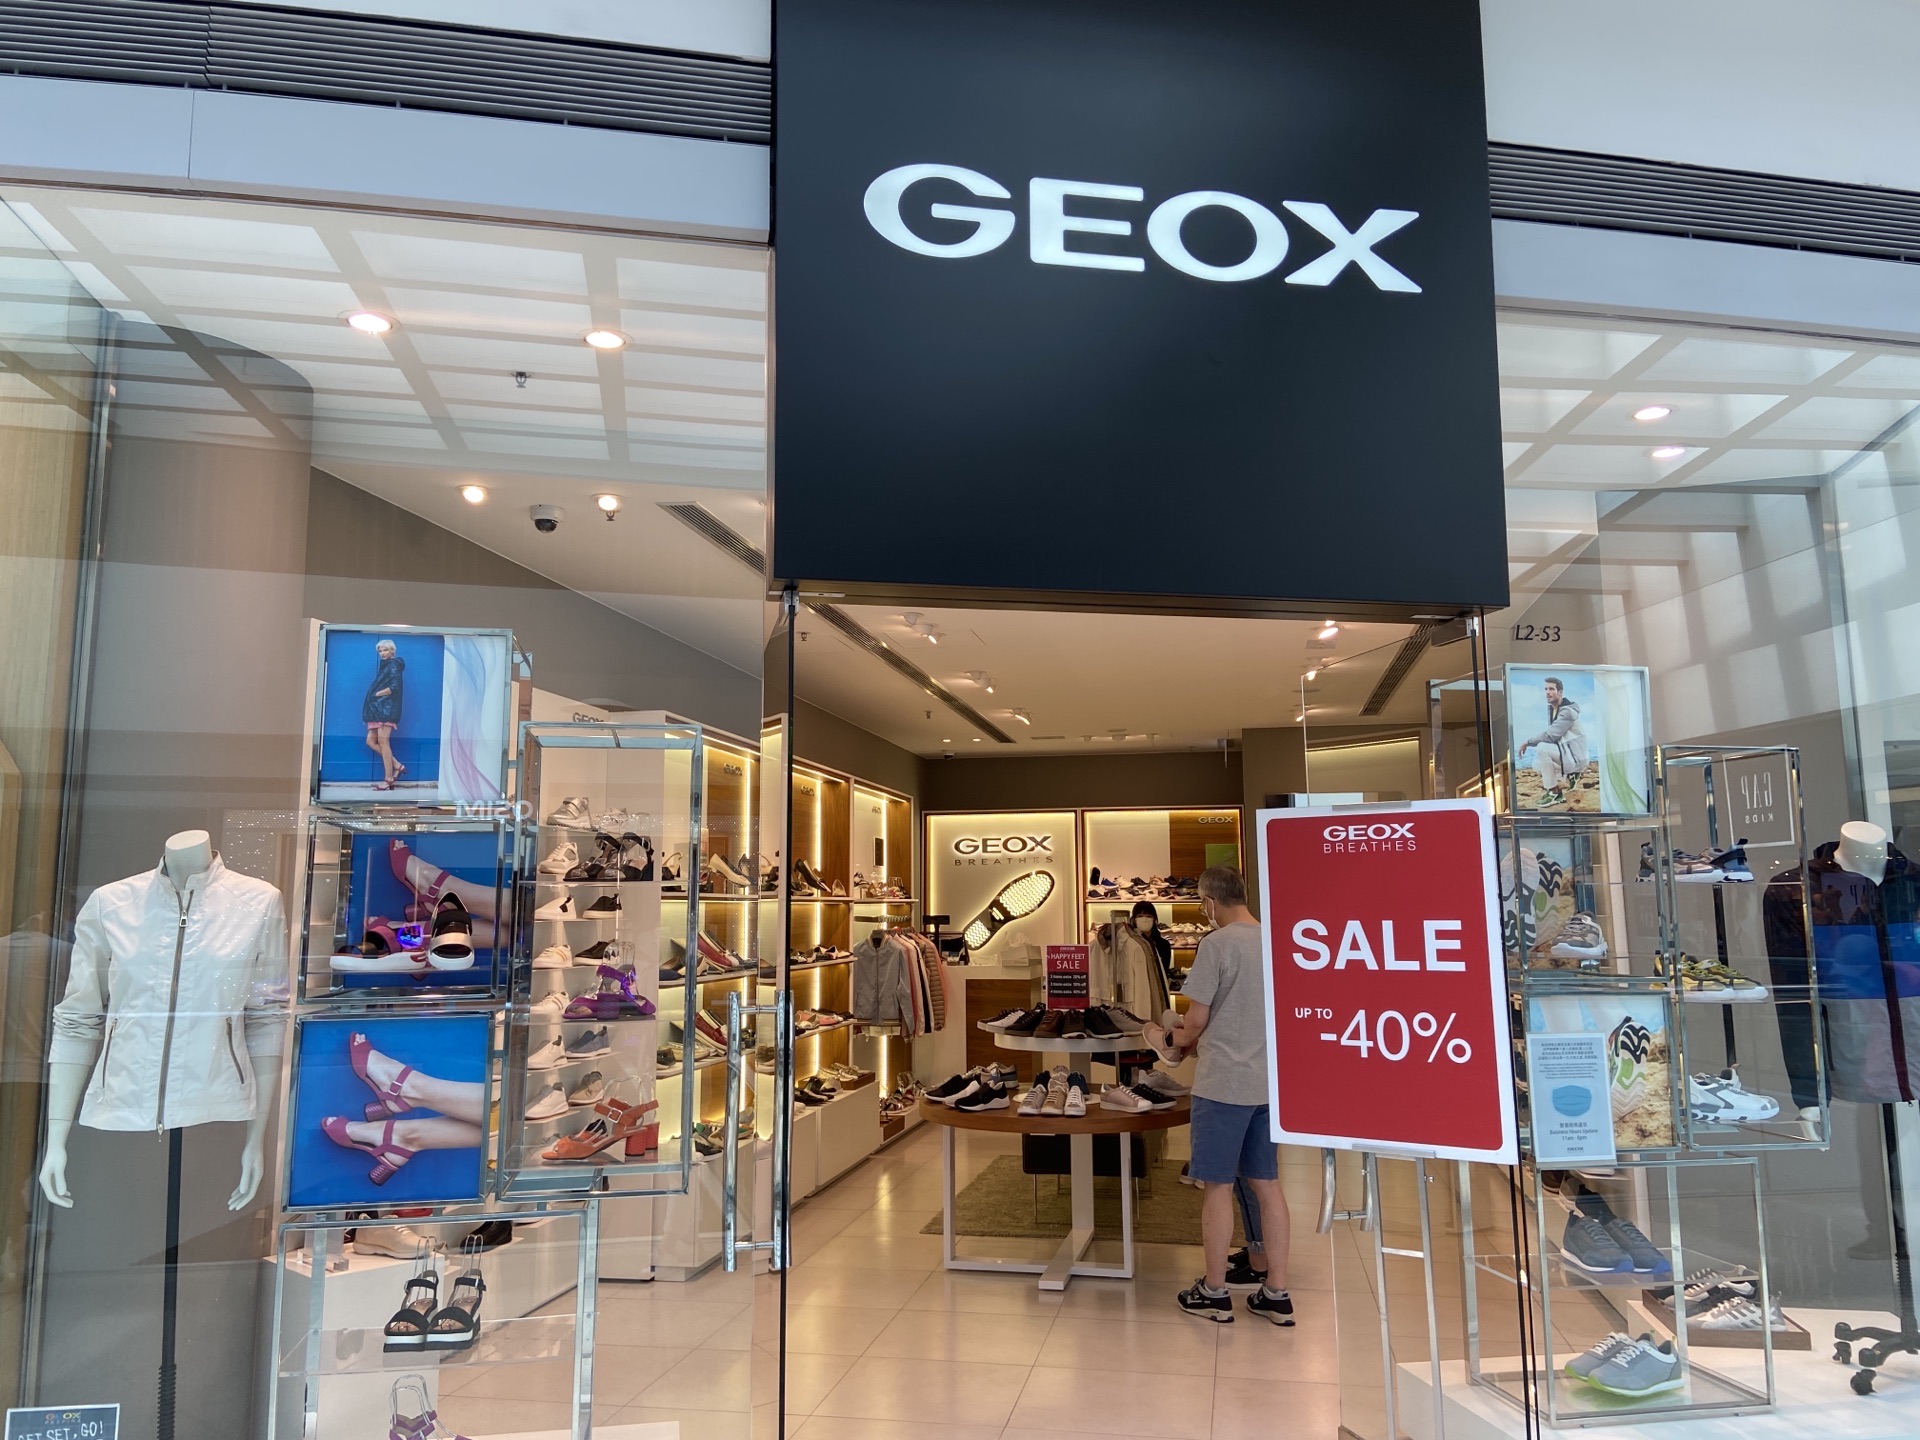 Shopping itineraries in GEOX(太古城中心一店) in 2023-06-27T17:00:00-07:00 (updated  in 2023-06-27T17:00:00-07:00) - Trip.com